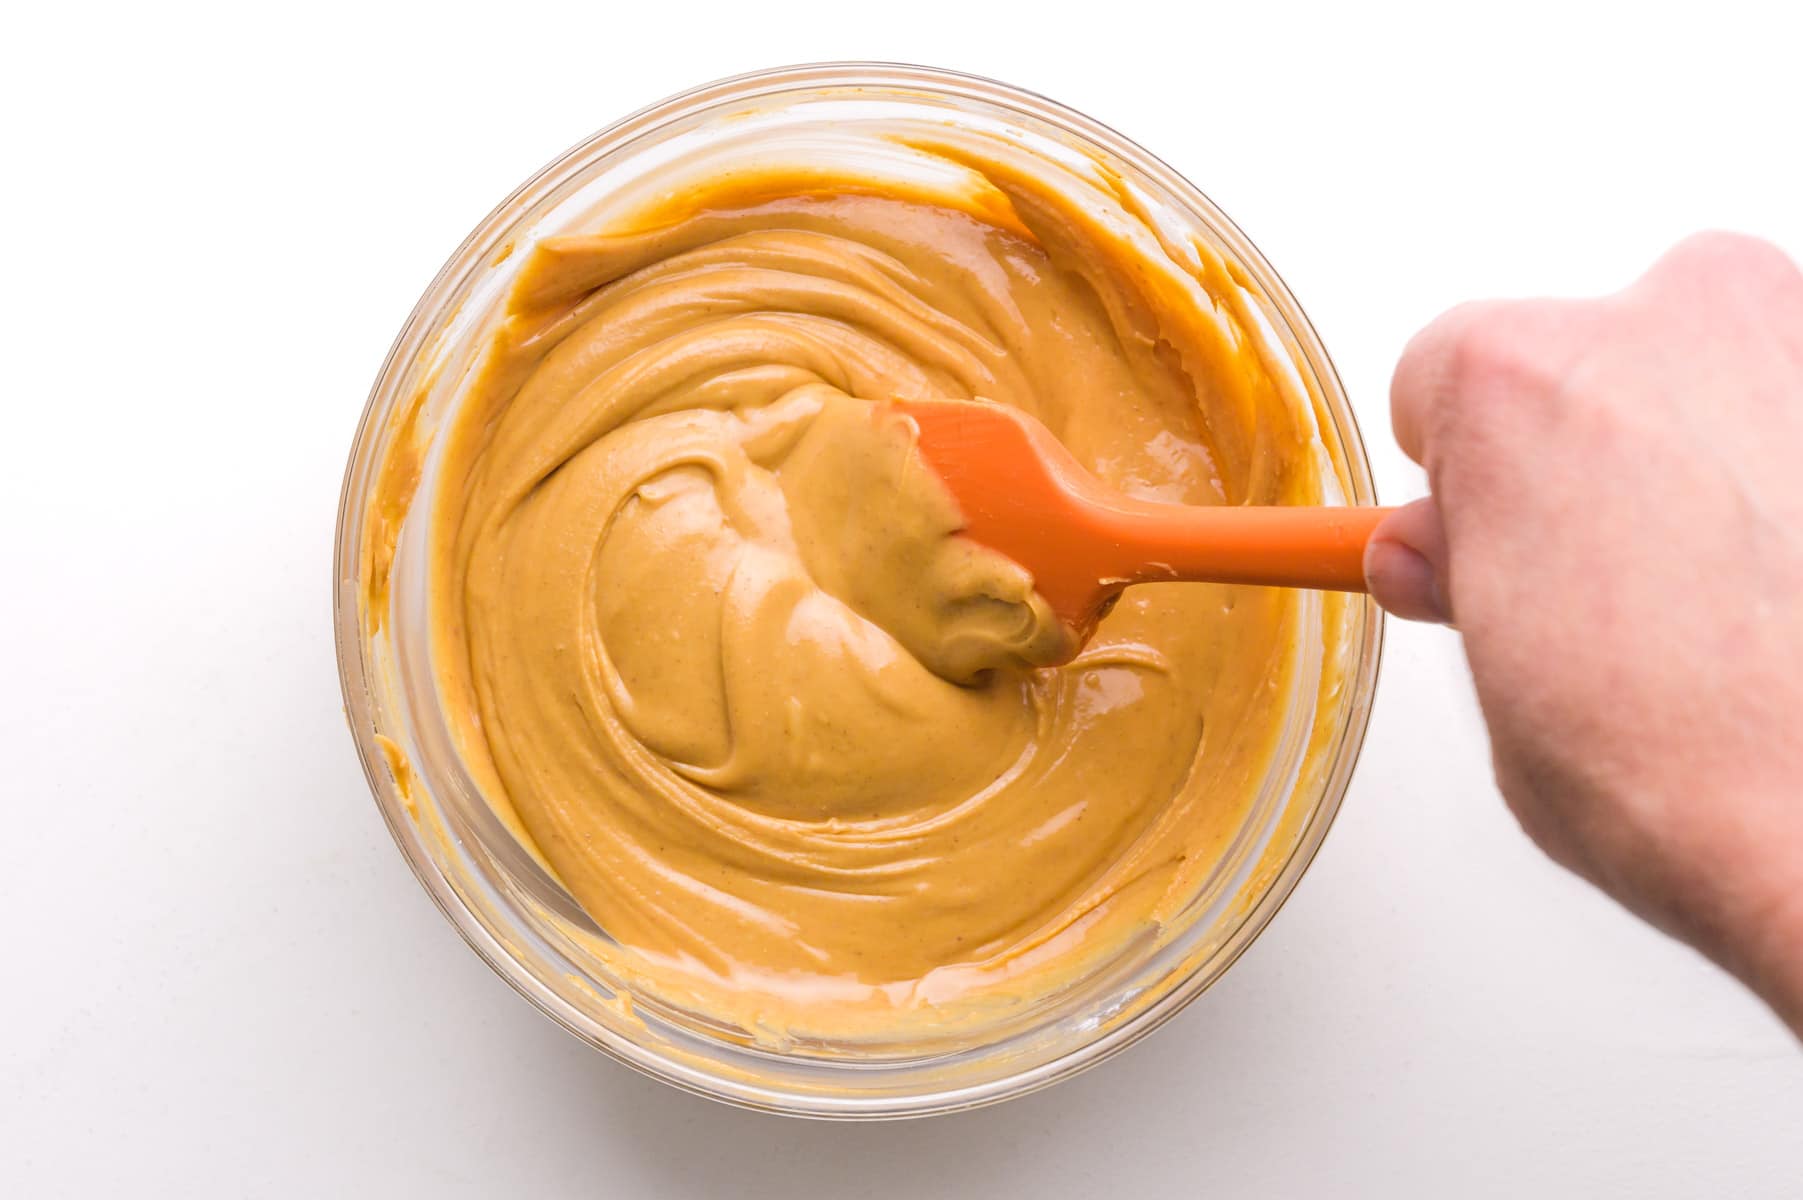  hand holds an orange spatula stirring peanut butter in a bowl.